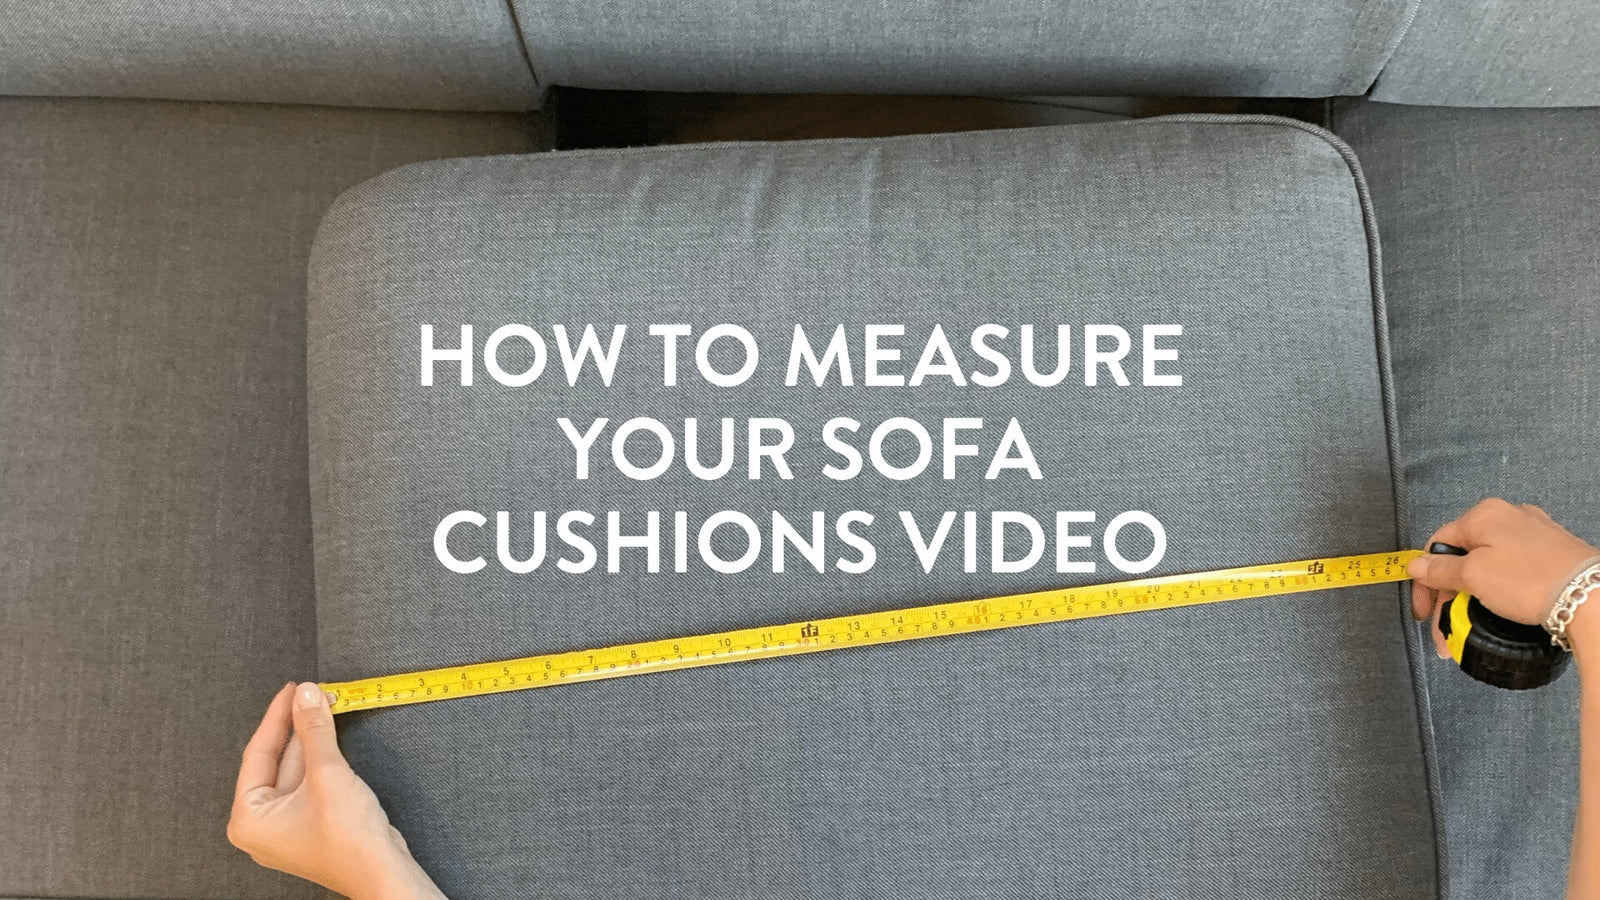 how to measure your sofa cushions video explain foam measuring tape Putnams firm soft hard saggy